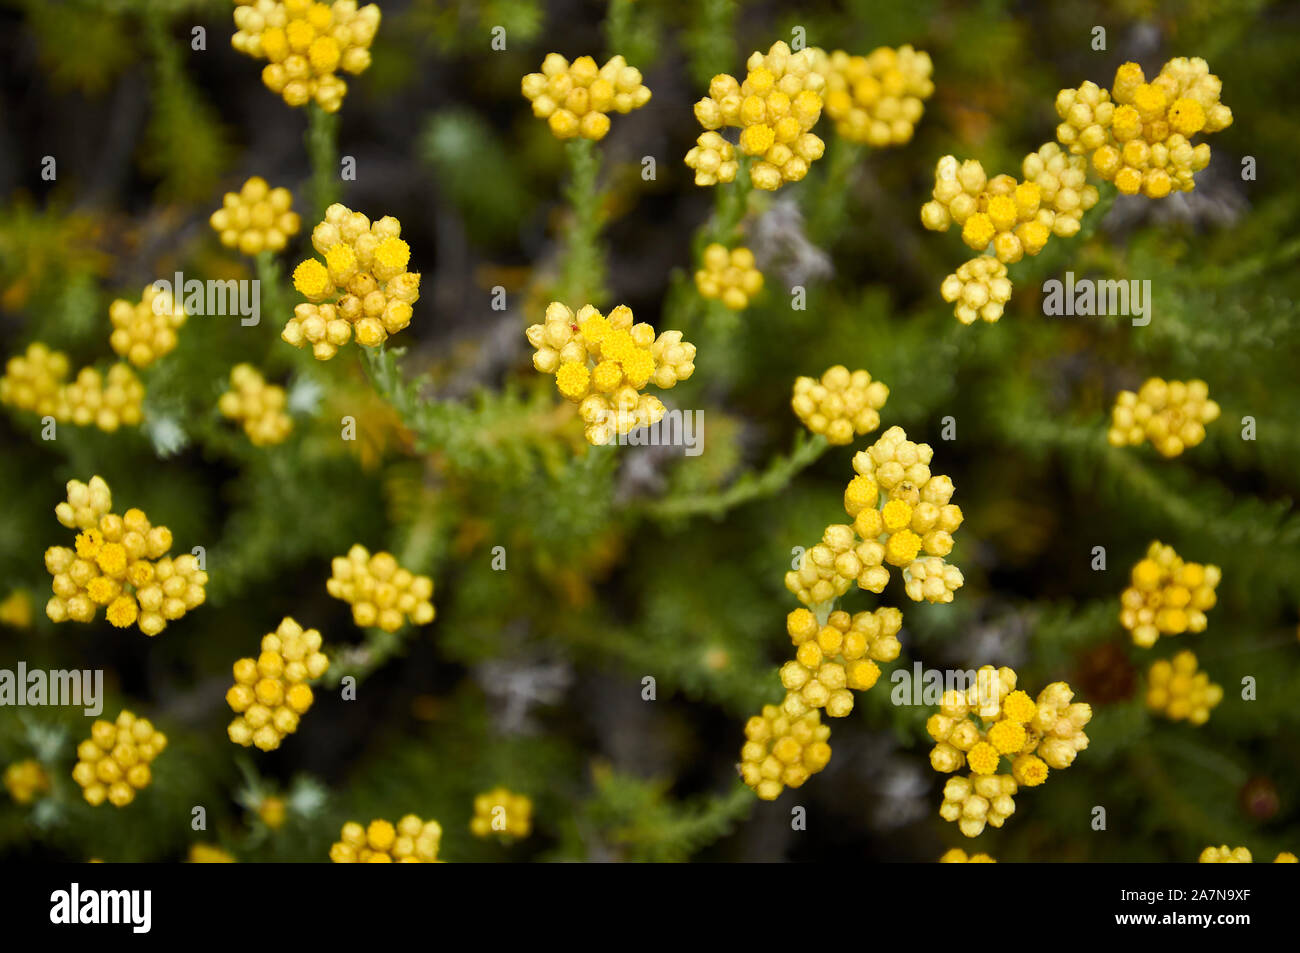 Close-up view of shrubby everlasting (Helichrysum stoechas) yellow flowers at Ses Salines Natural Park (Formentera Island, Balearic Islands, Spain) Stock Photo